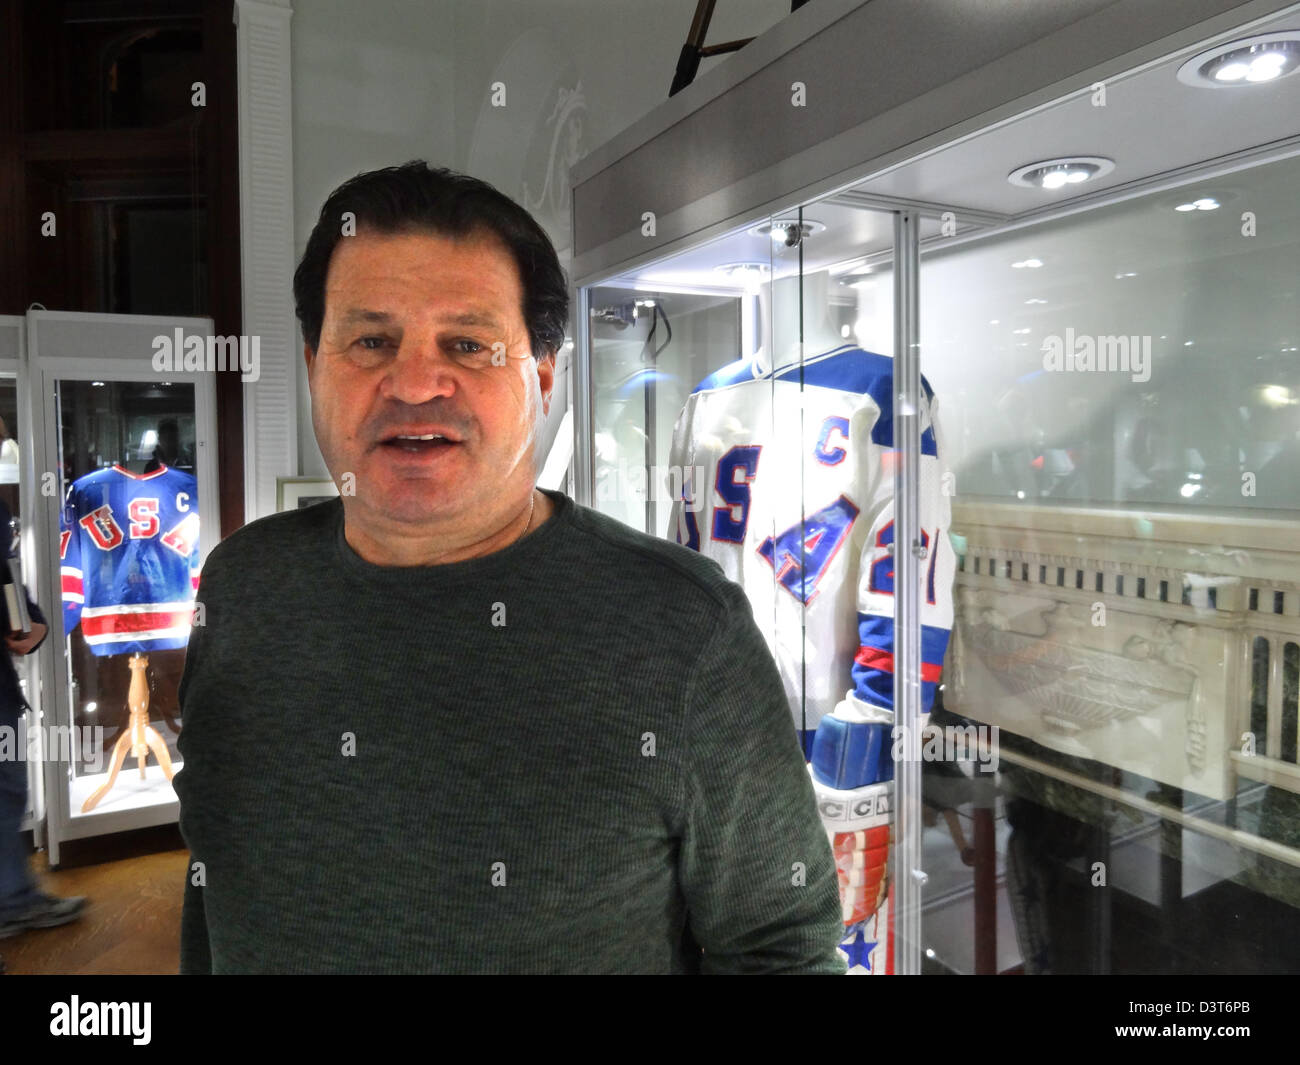 Former US Ice hockey player Mike Eruzione poses in front of his jersey (R) which was auctioned in New York, United States, 23 February 2013. Mike Eruzione wore the shirt during the 1980 Winter Olympics when he was captain of the US ice hockey national team. The United States team, made up of amateur and collegiate players, defeated the Soviet team, who had won nearly every world championship and Olympic tournament since 1954. The 'Miracle on Ice' is one of the Top Sports Moment of the 20th Century. The jersey was sold for 657,250 dollars (498,000 euros). Photo: Nezih Payzin Stock Photo